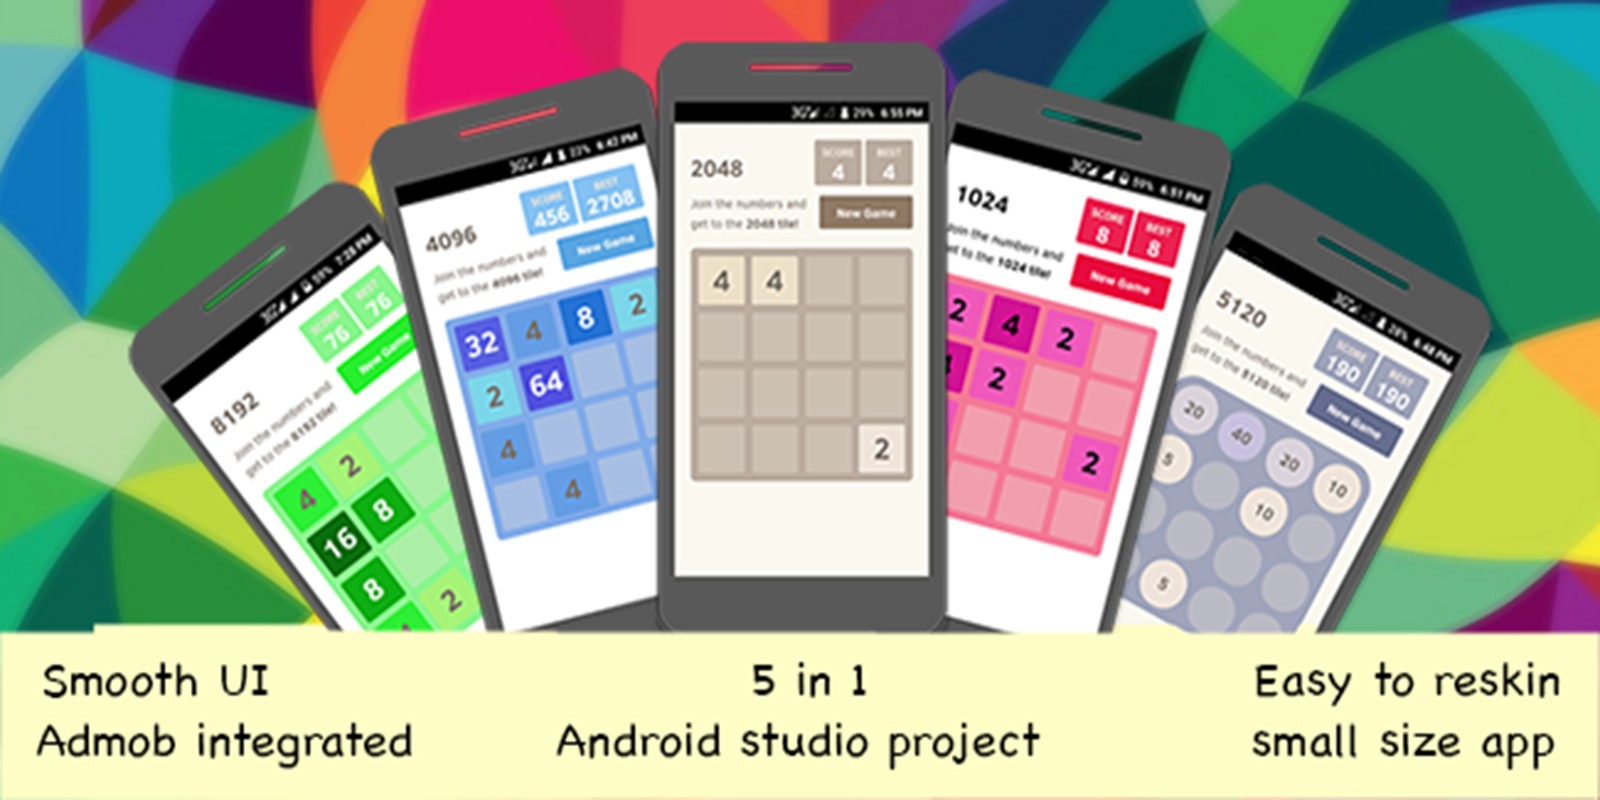 2048 And 4 Games - Android Source Code by Browsesimply | Codester